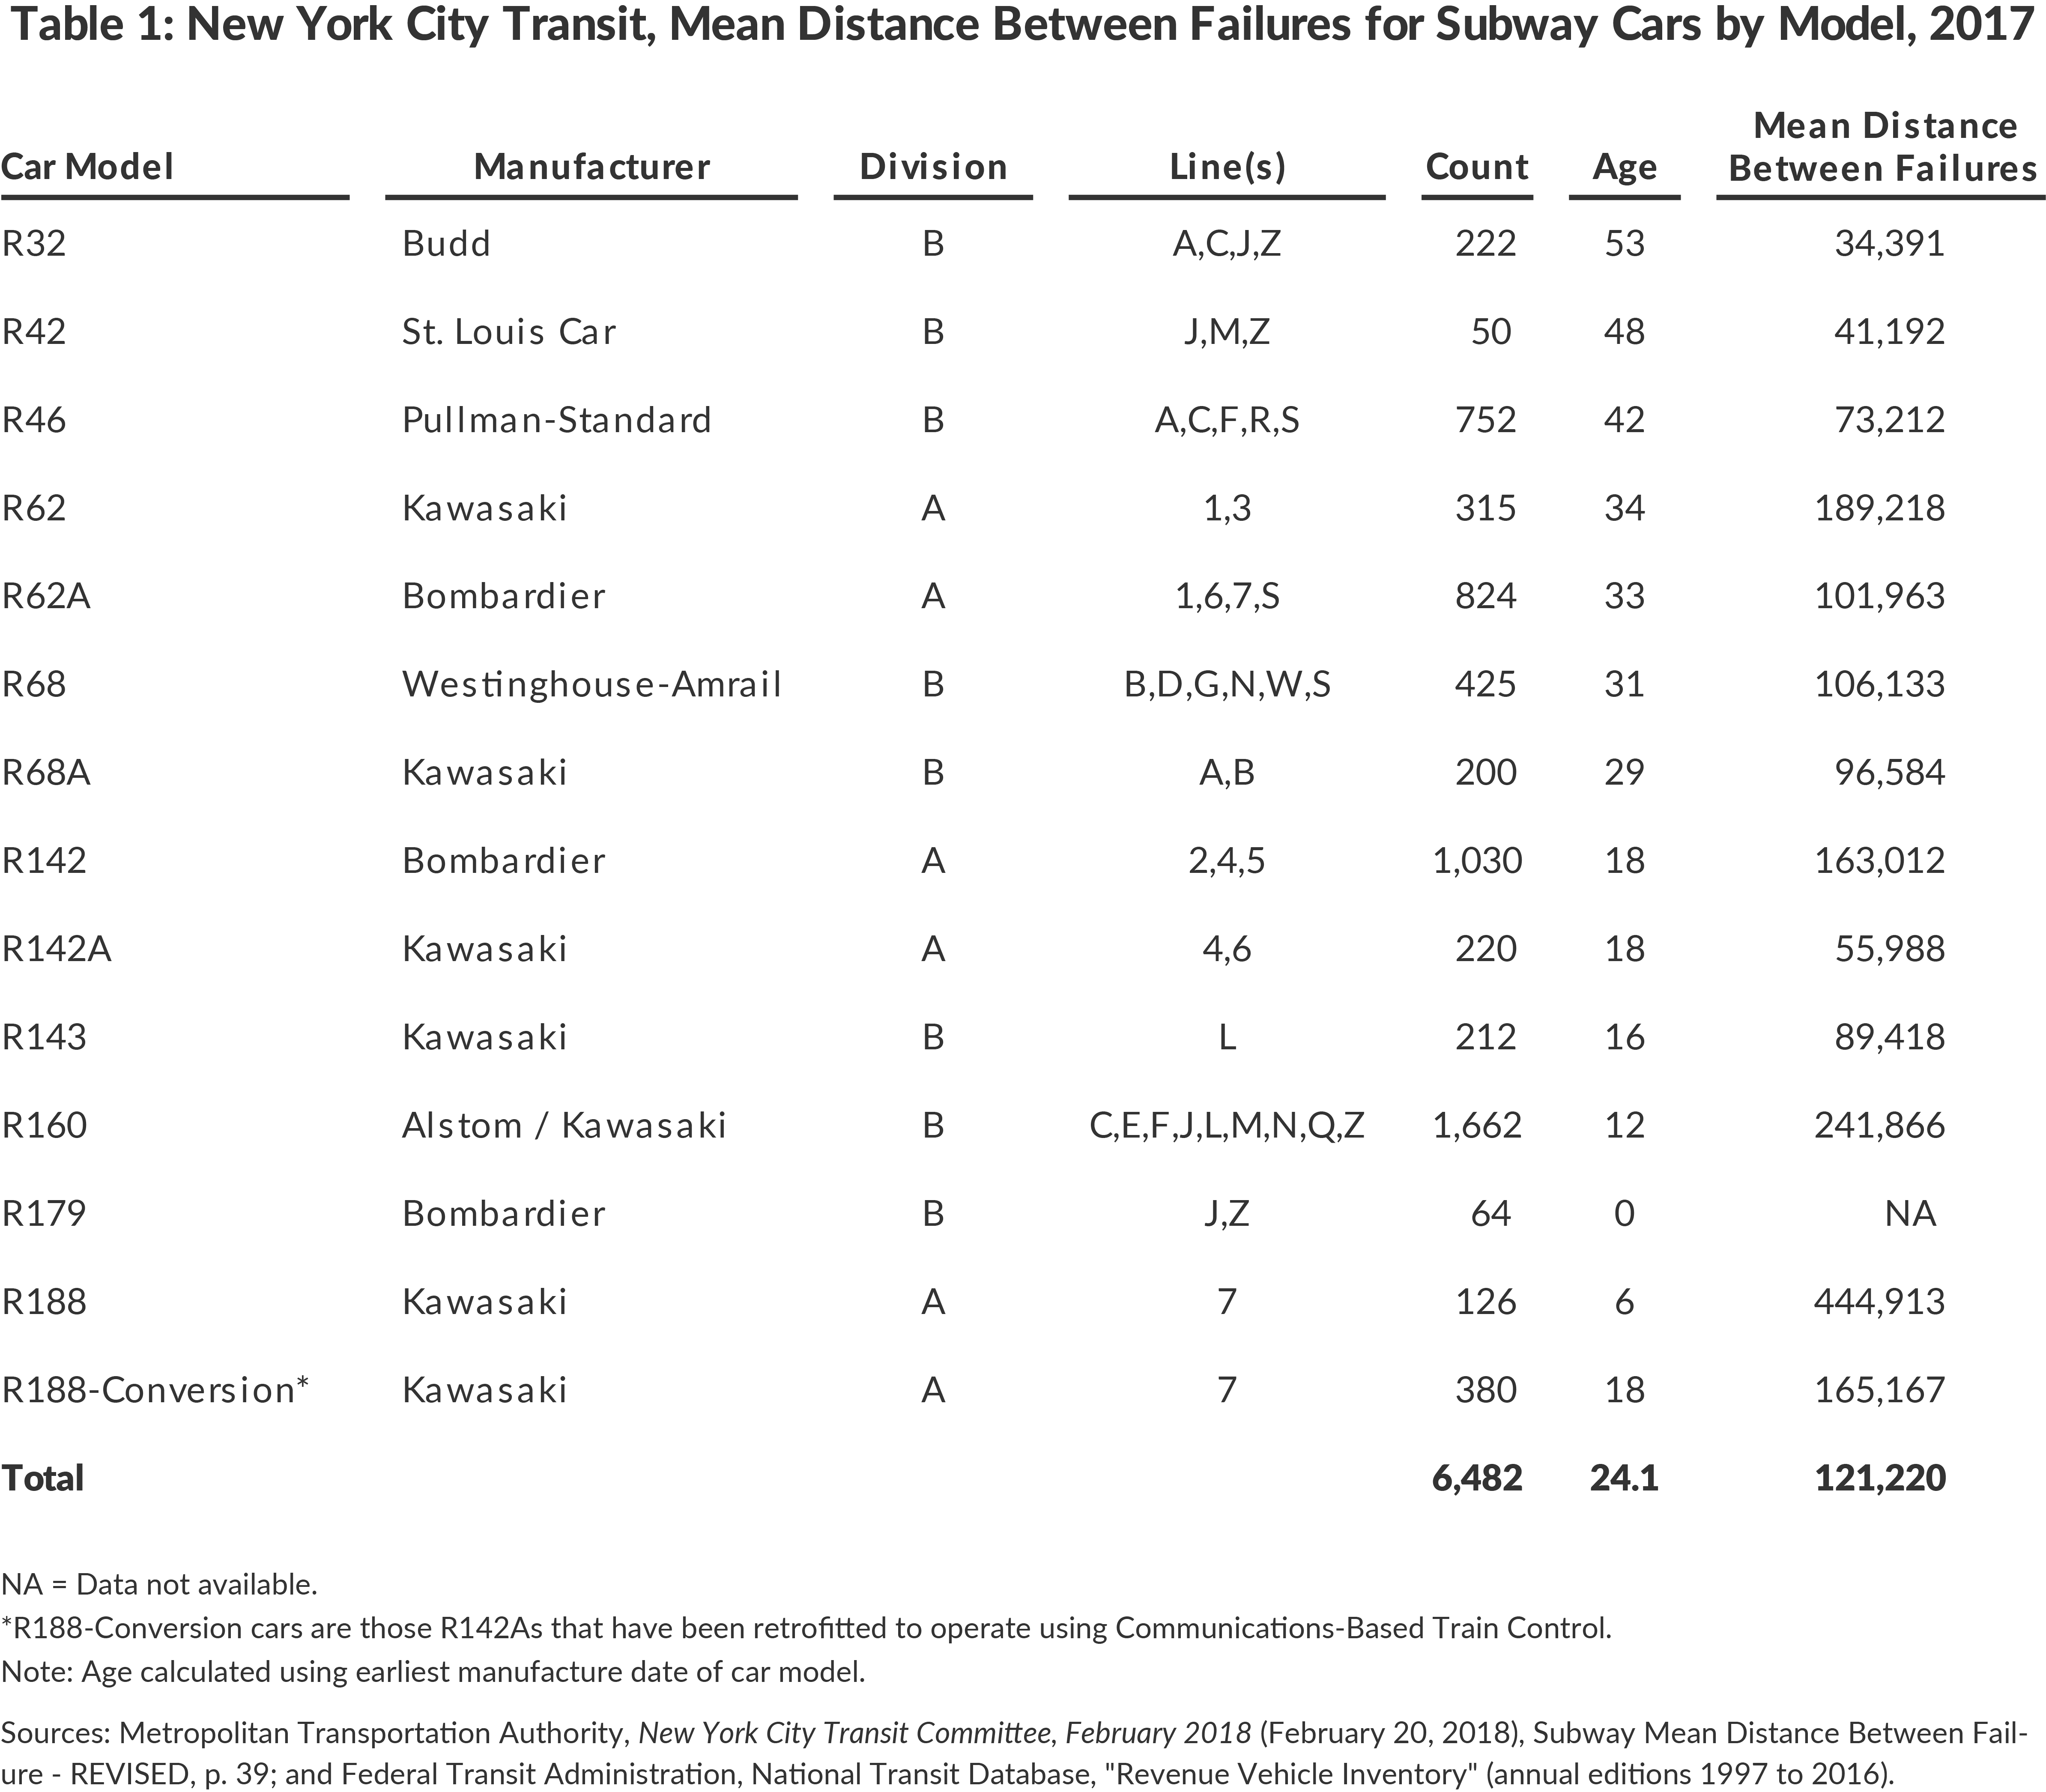 Table 1: New York City Transit, Mean Distance Between Failures for Subway Cars by Model, 2017